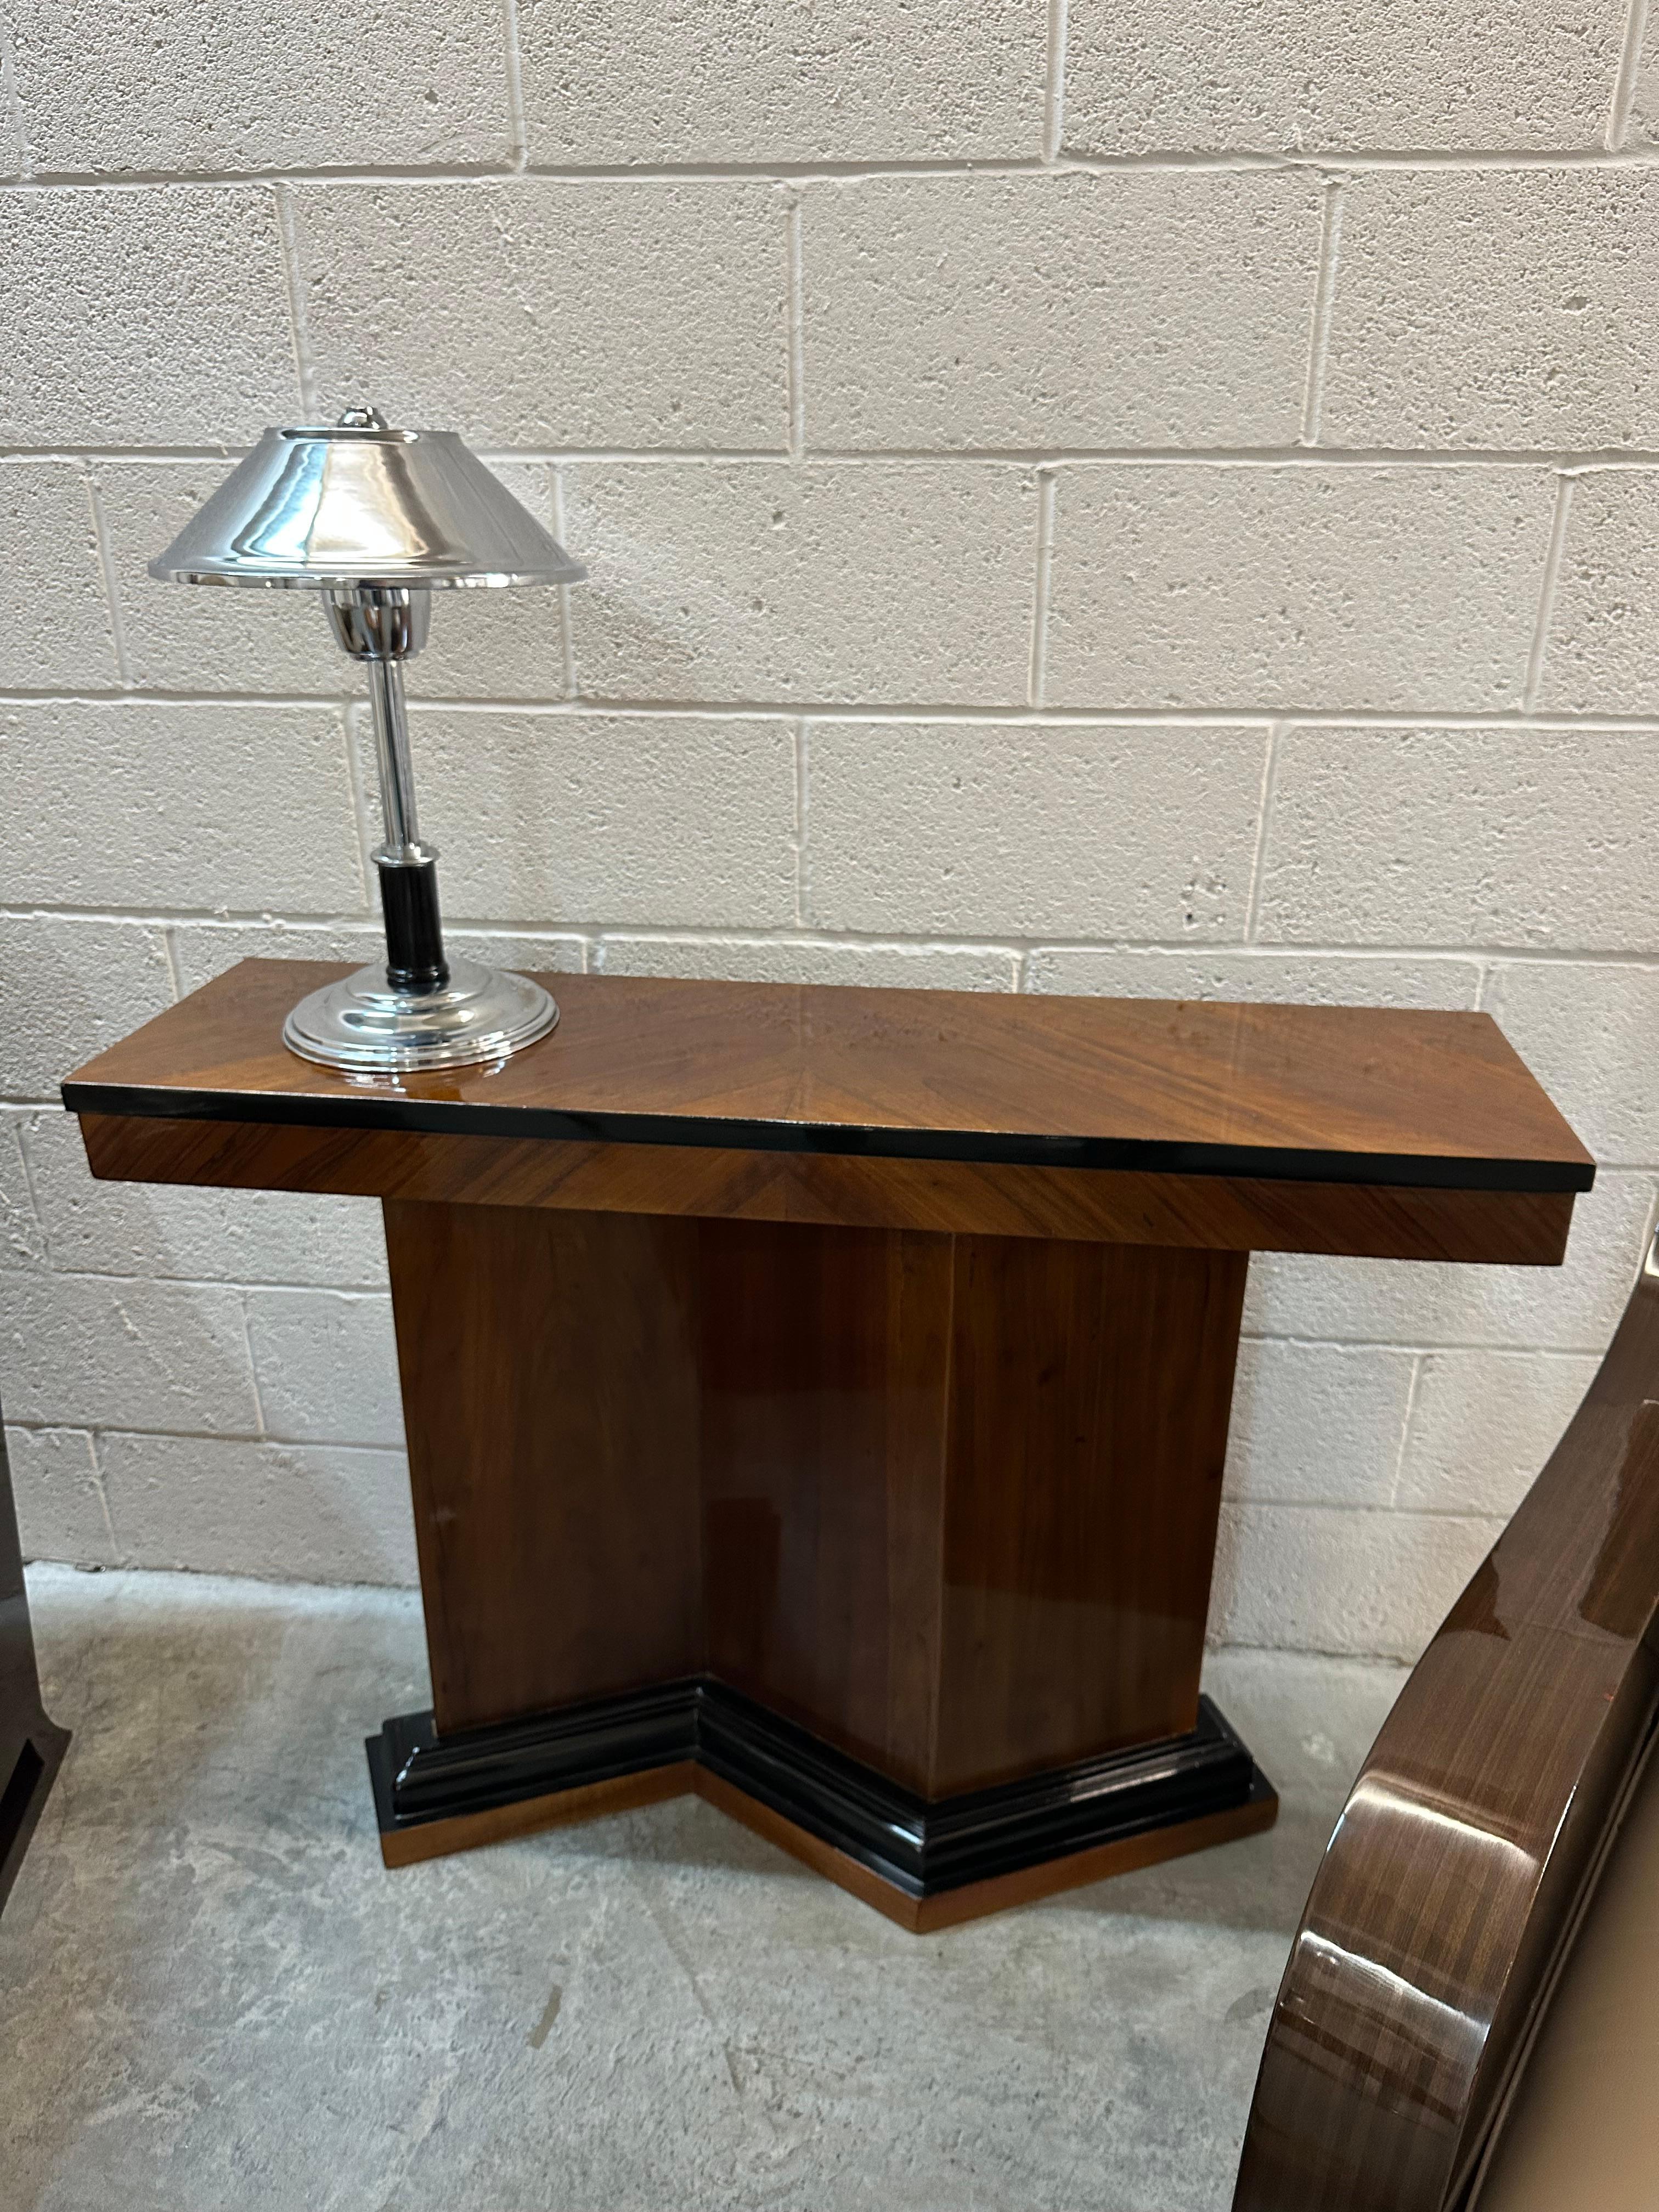 Pair of Art Deco Table Lamp in wood and chrome, 1930 For Sale 5